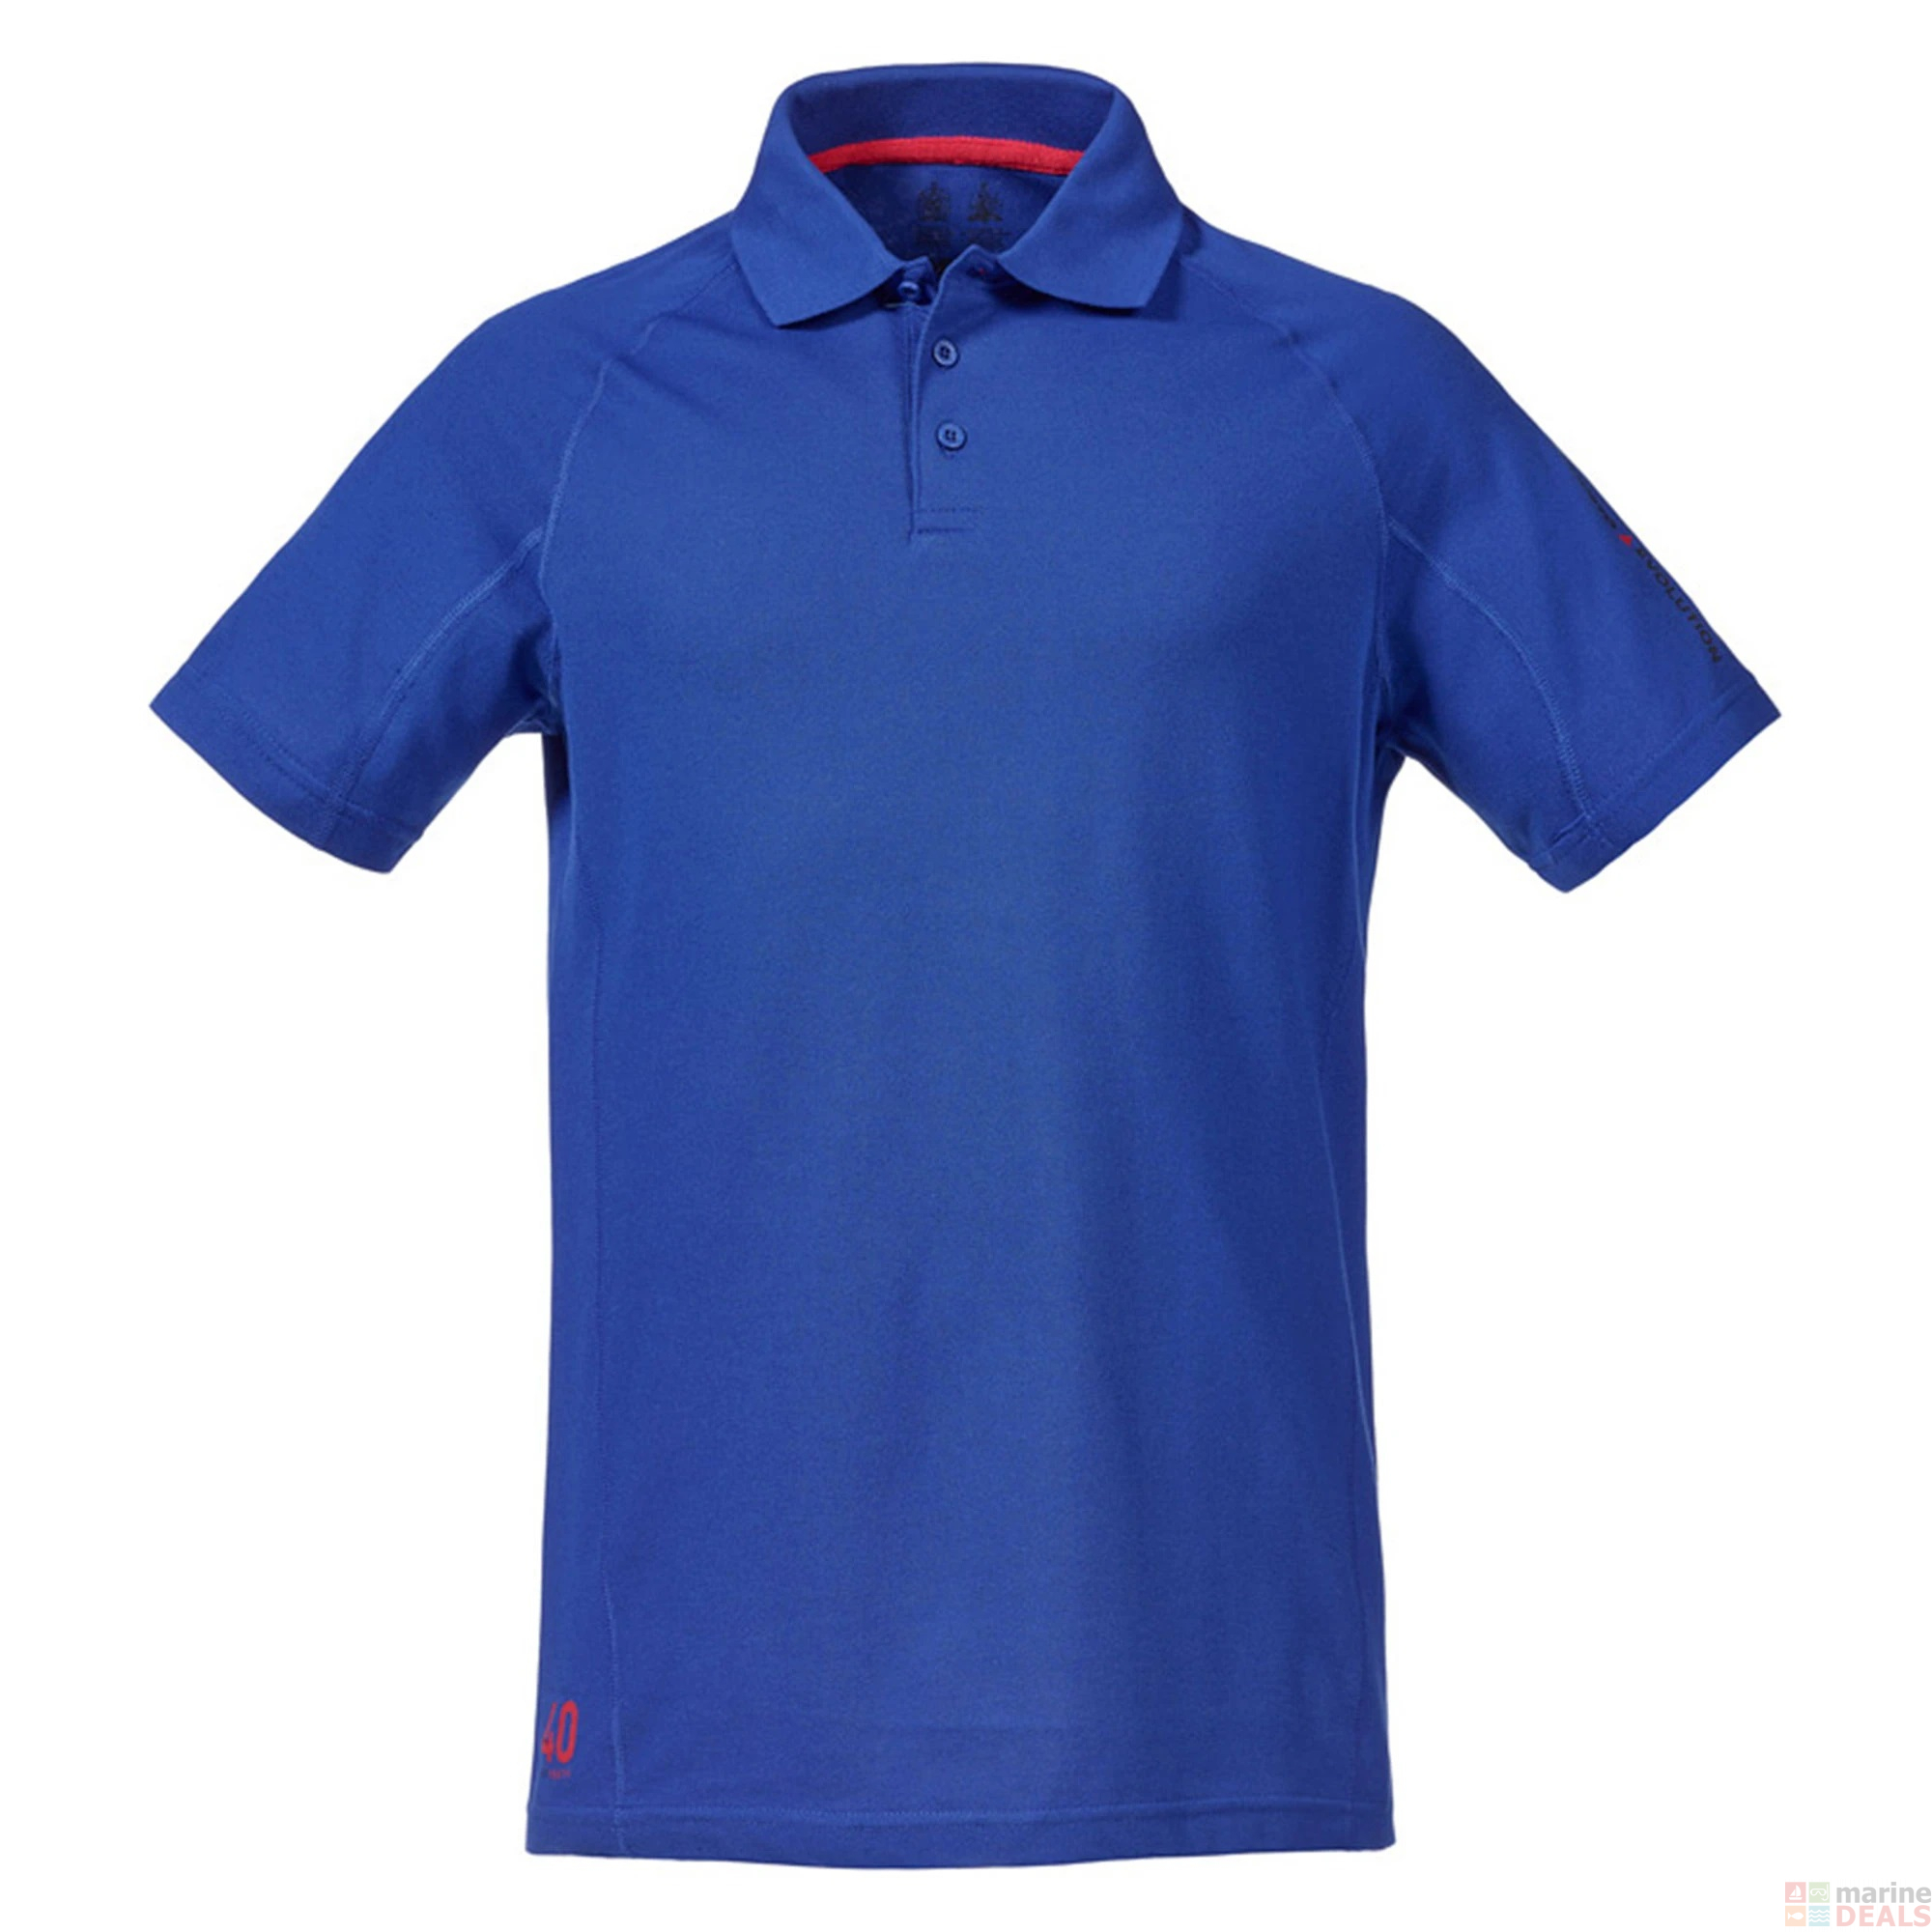 Buy Musto Evolution Sunblock Polo Shirt Nautical Blue L online at ...